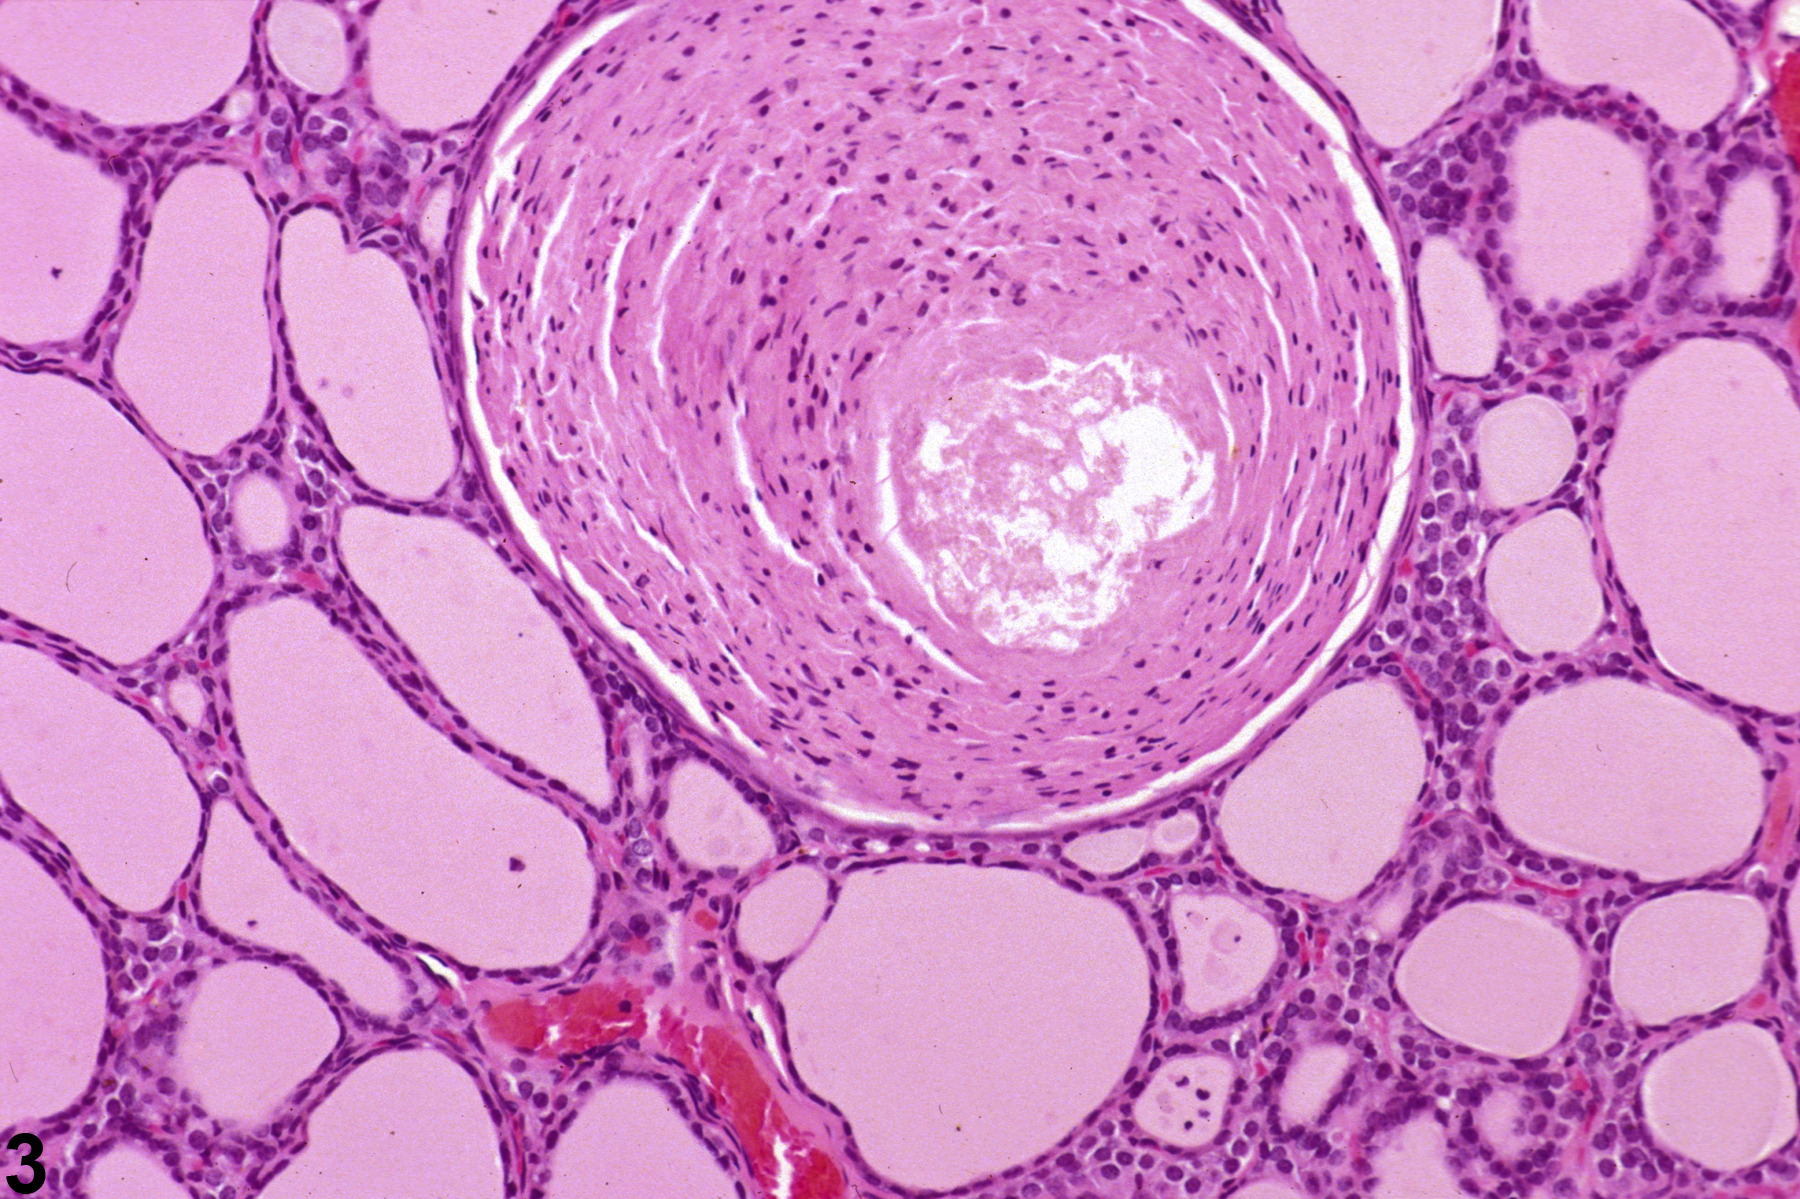 Image of cyst, congenital in the thyroid gland from a male B6C3F1 mouse in a chronic study